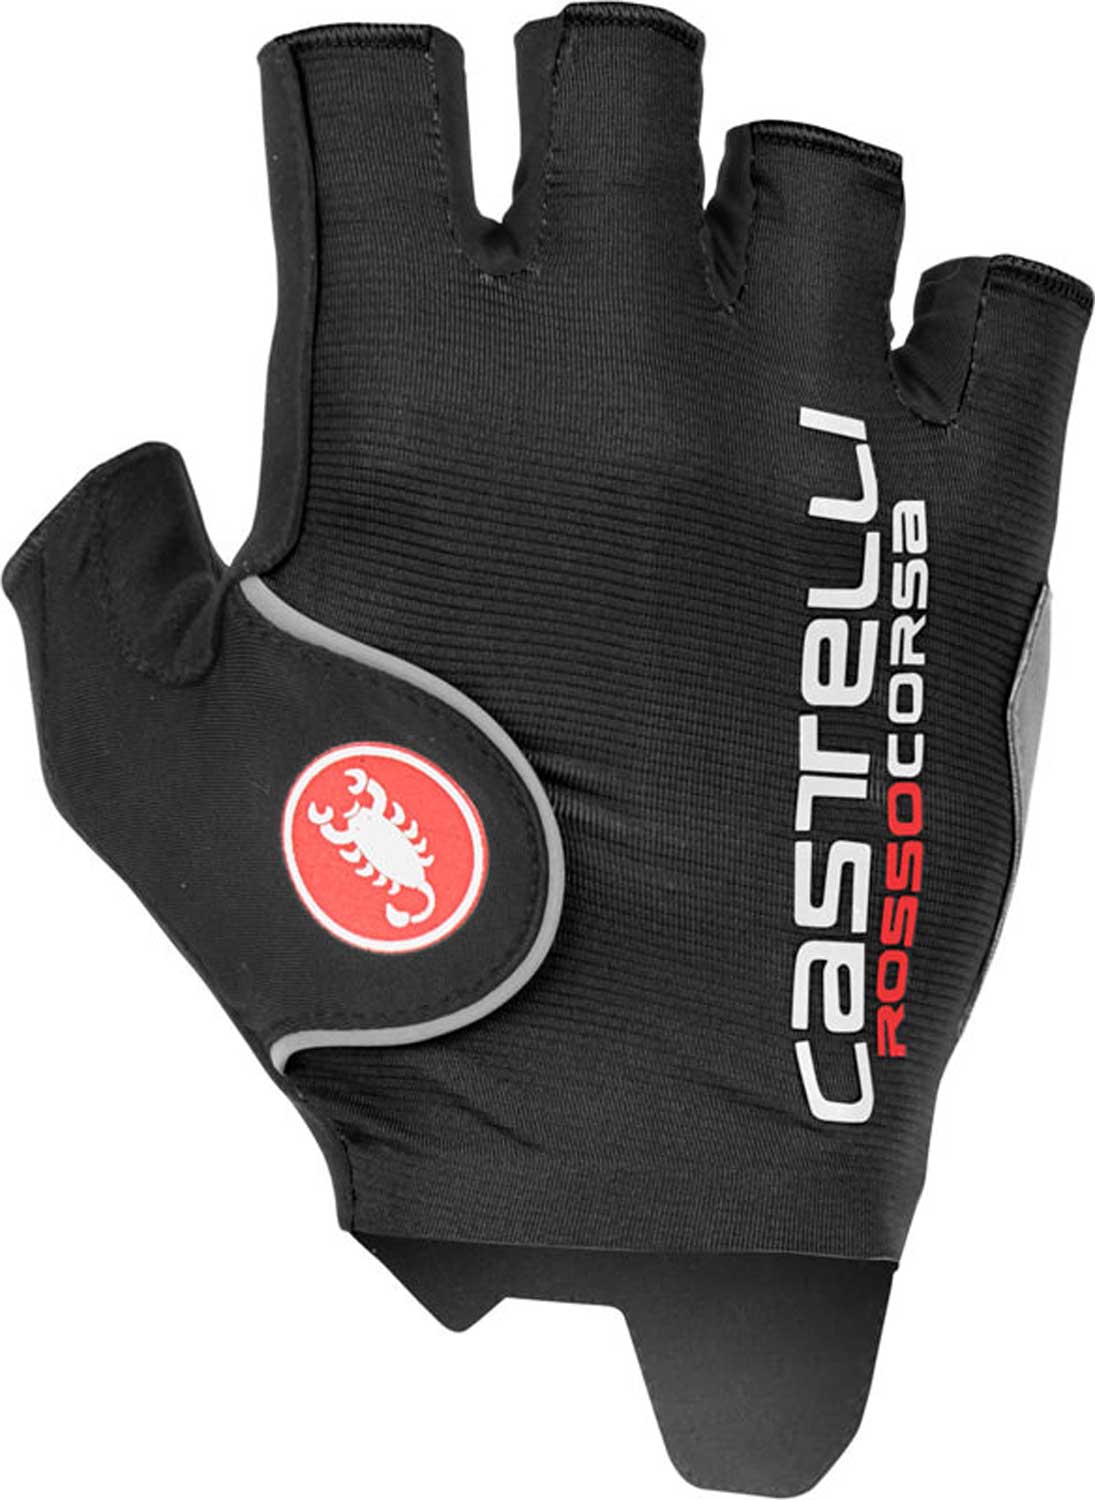 Cycling gloves